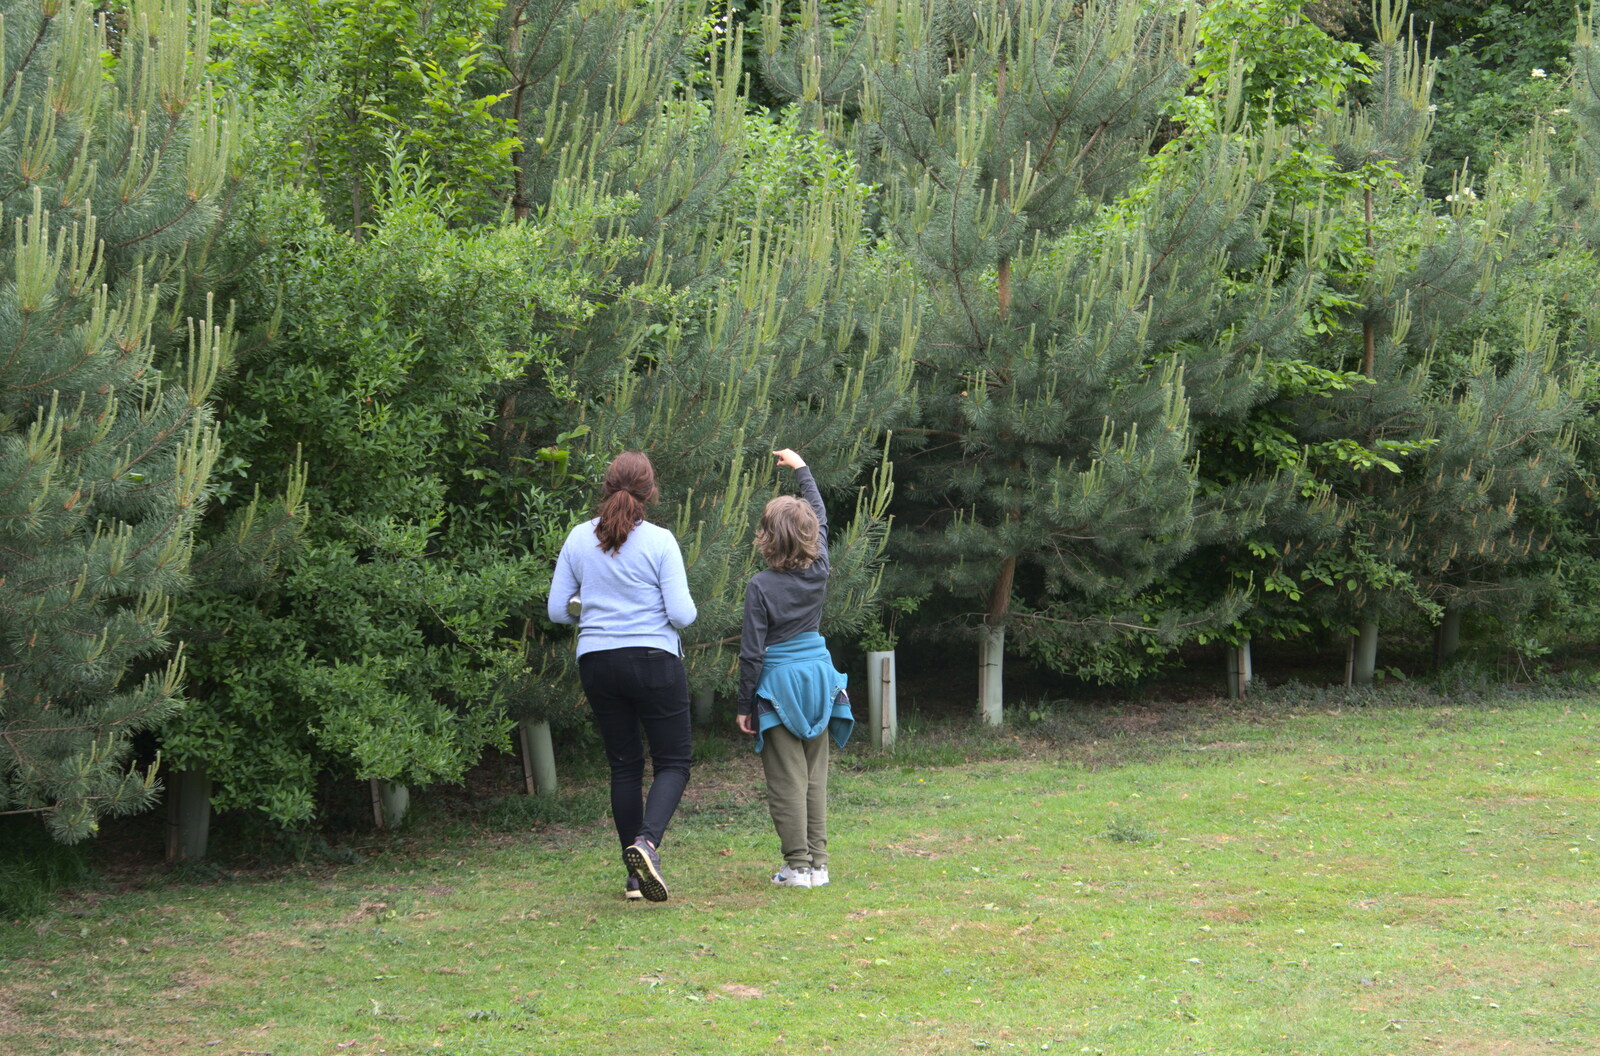 Isobel and Fred are off looking at curious trees from More Lockdown Fun, Diss and Eye, Norfolk and Suffolk - 30th May 2020